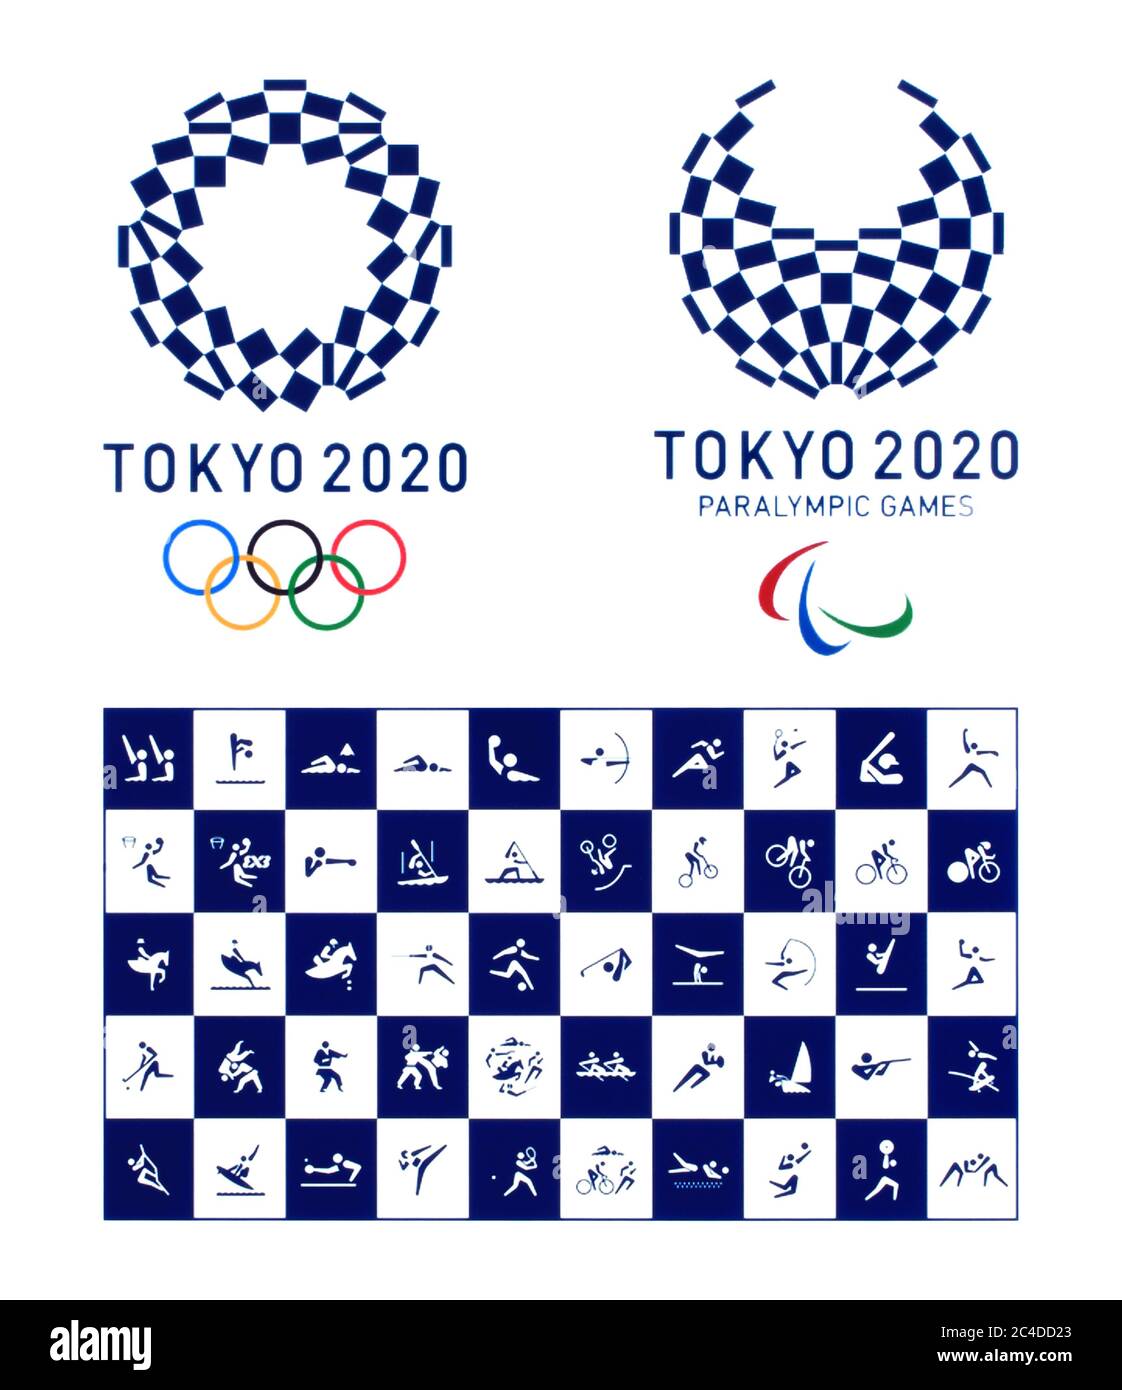 Kiev, Ukraine - October 04, 2019: Official logo of the 2020 Summer Olympic Games with official icons of kinds of sport in Tokyo, Japan, from July 24 t Stock Photo